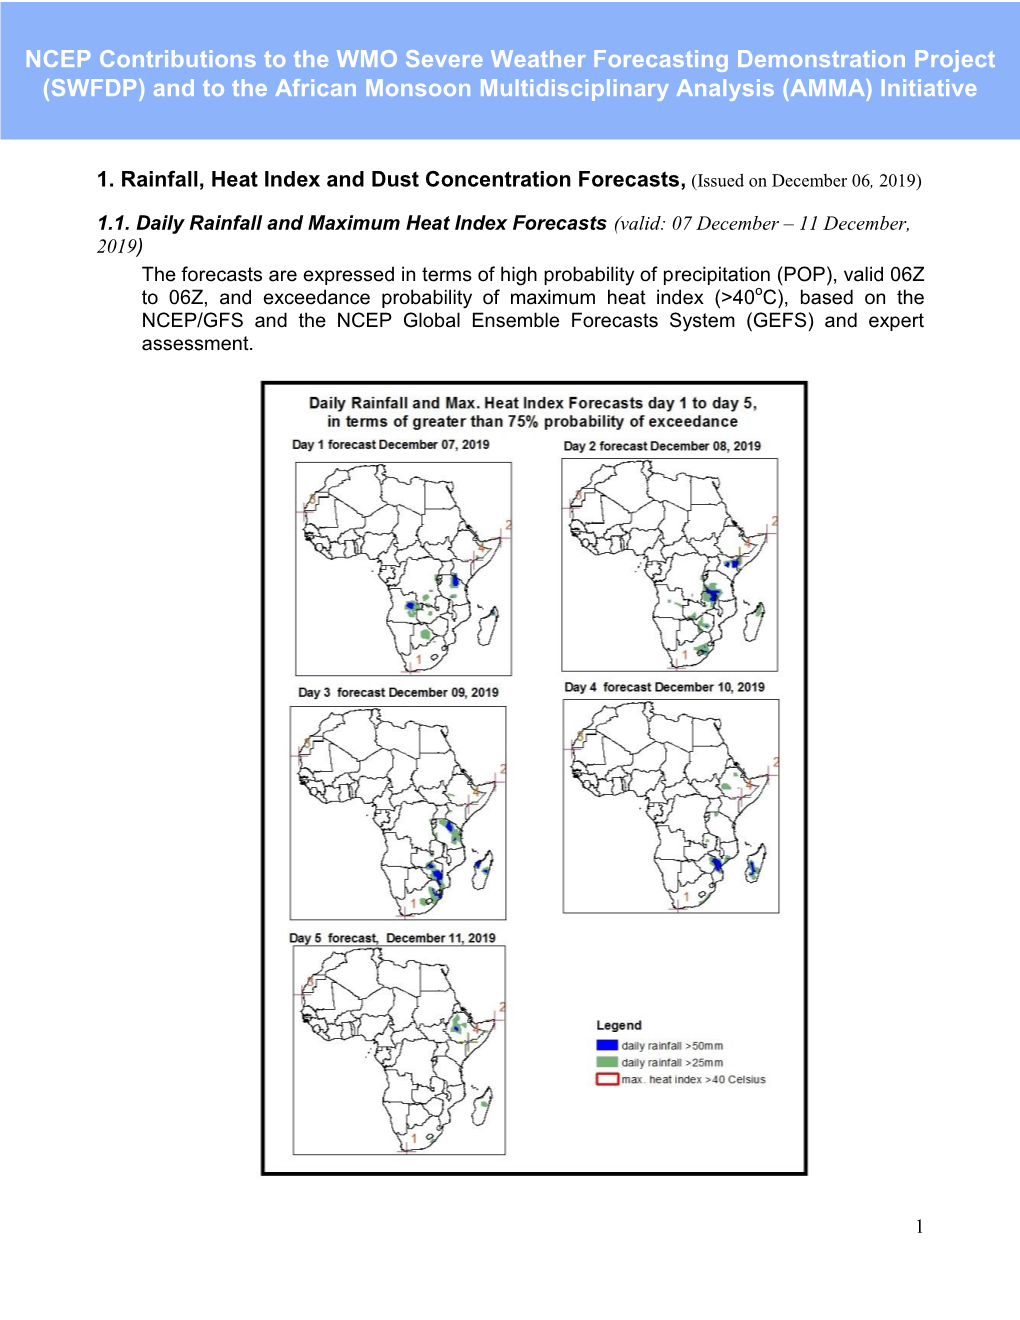 NCEP Contributions to the WMO Severe Weather Forecasting Demonstration Project (SWFDP) and to the African Monsoon Multidisciplinary Analysis (AMMA) Initiative